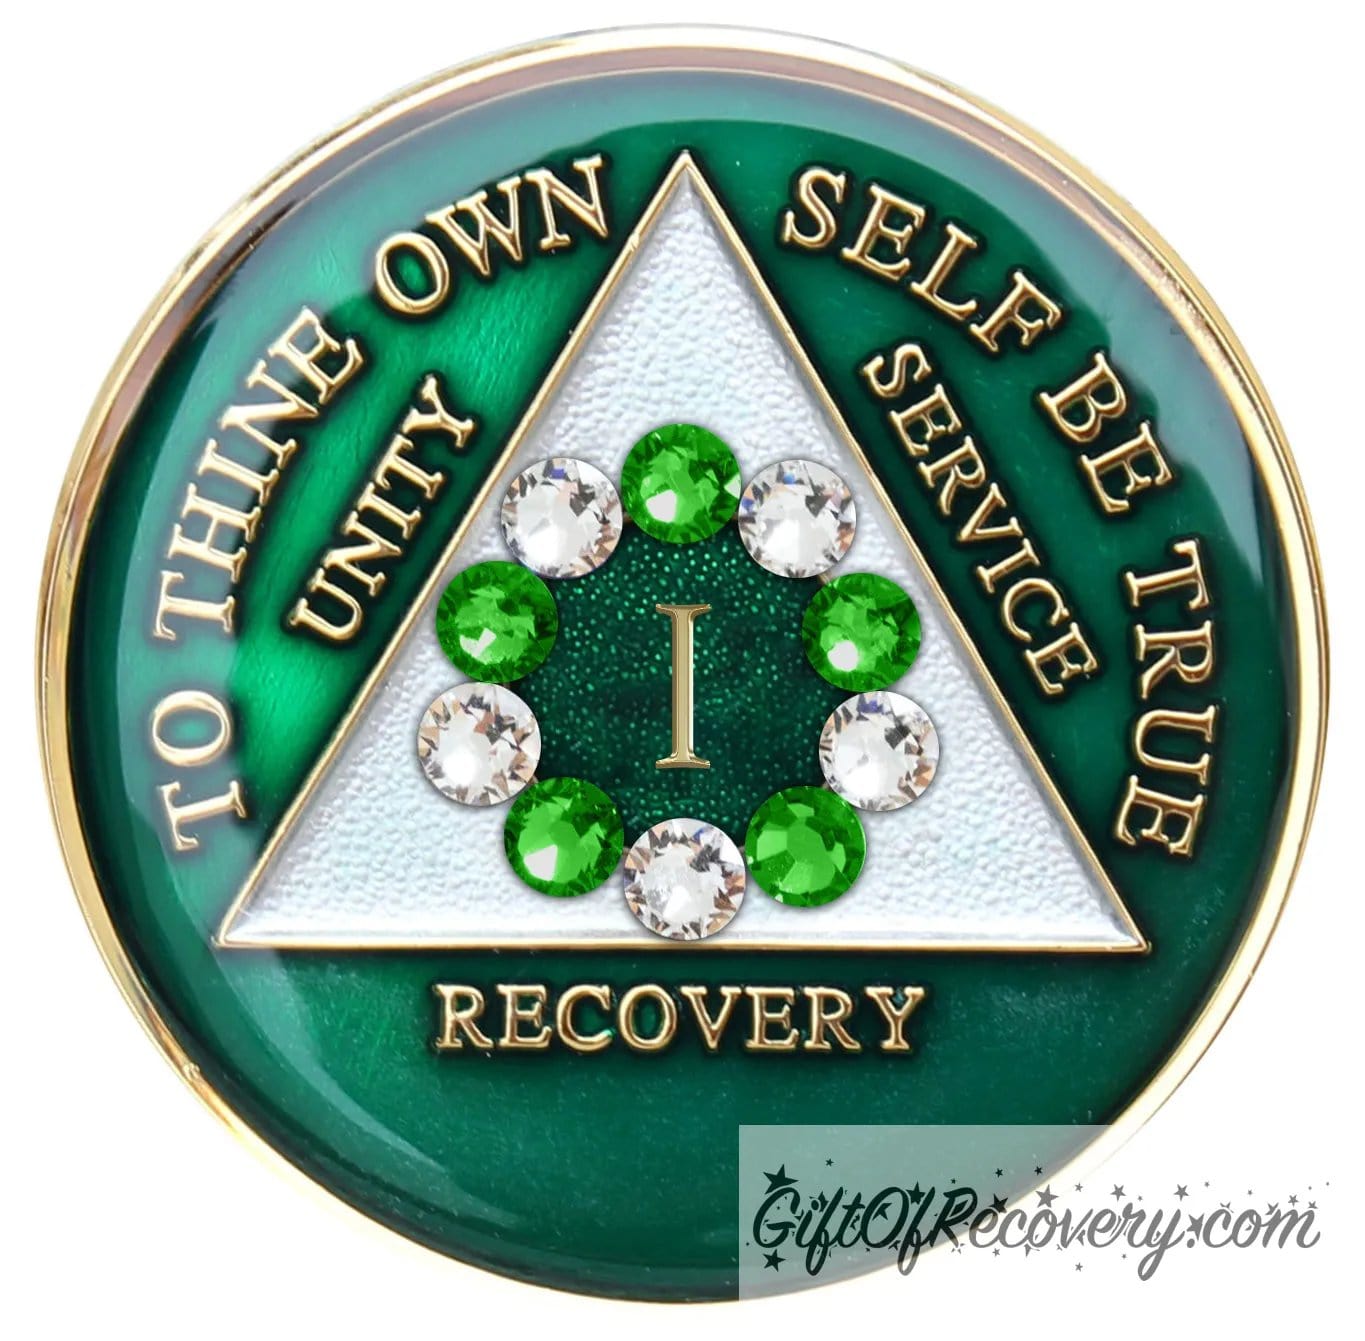 1 year emerald green AA medallion with the 10th step in emphasis in the center, 5 emerald green genuine crystals and 5 clear genuine crystals, the triangle is pearl white, while the circle is sparkle green. To thine own self be true, unity, service, recovery, and the roman numeral 1, are 14k gold and sealed with resin for a glossy finish.